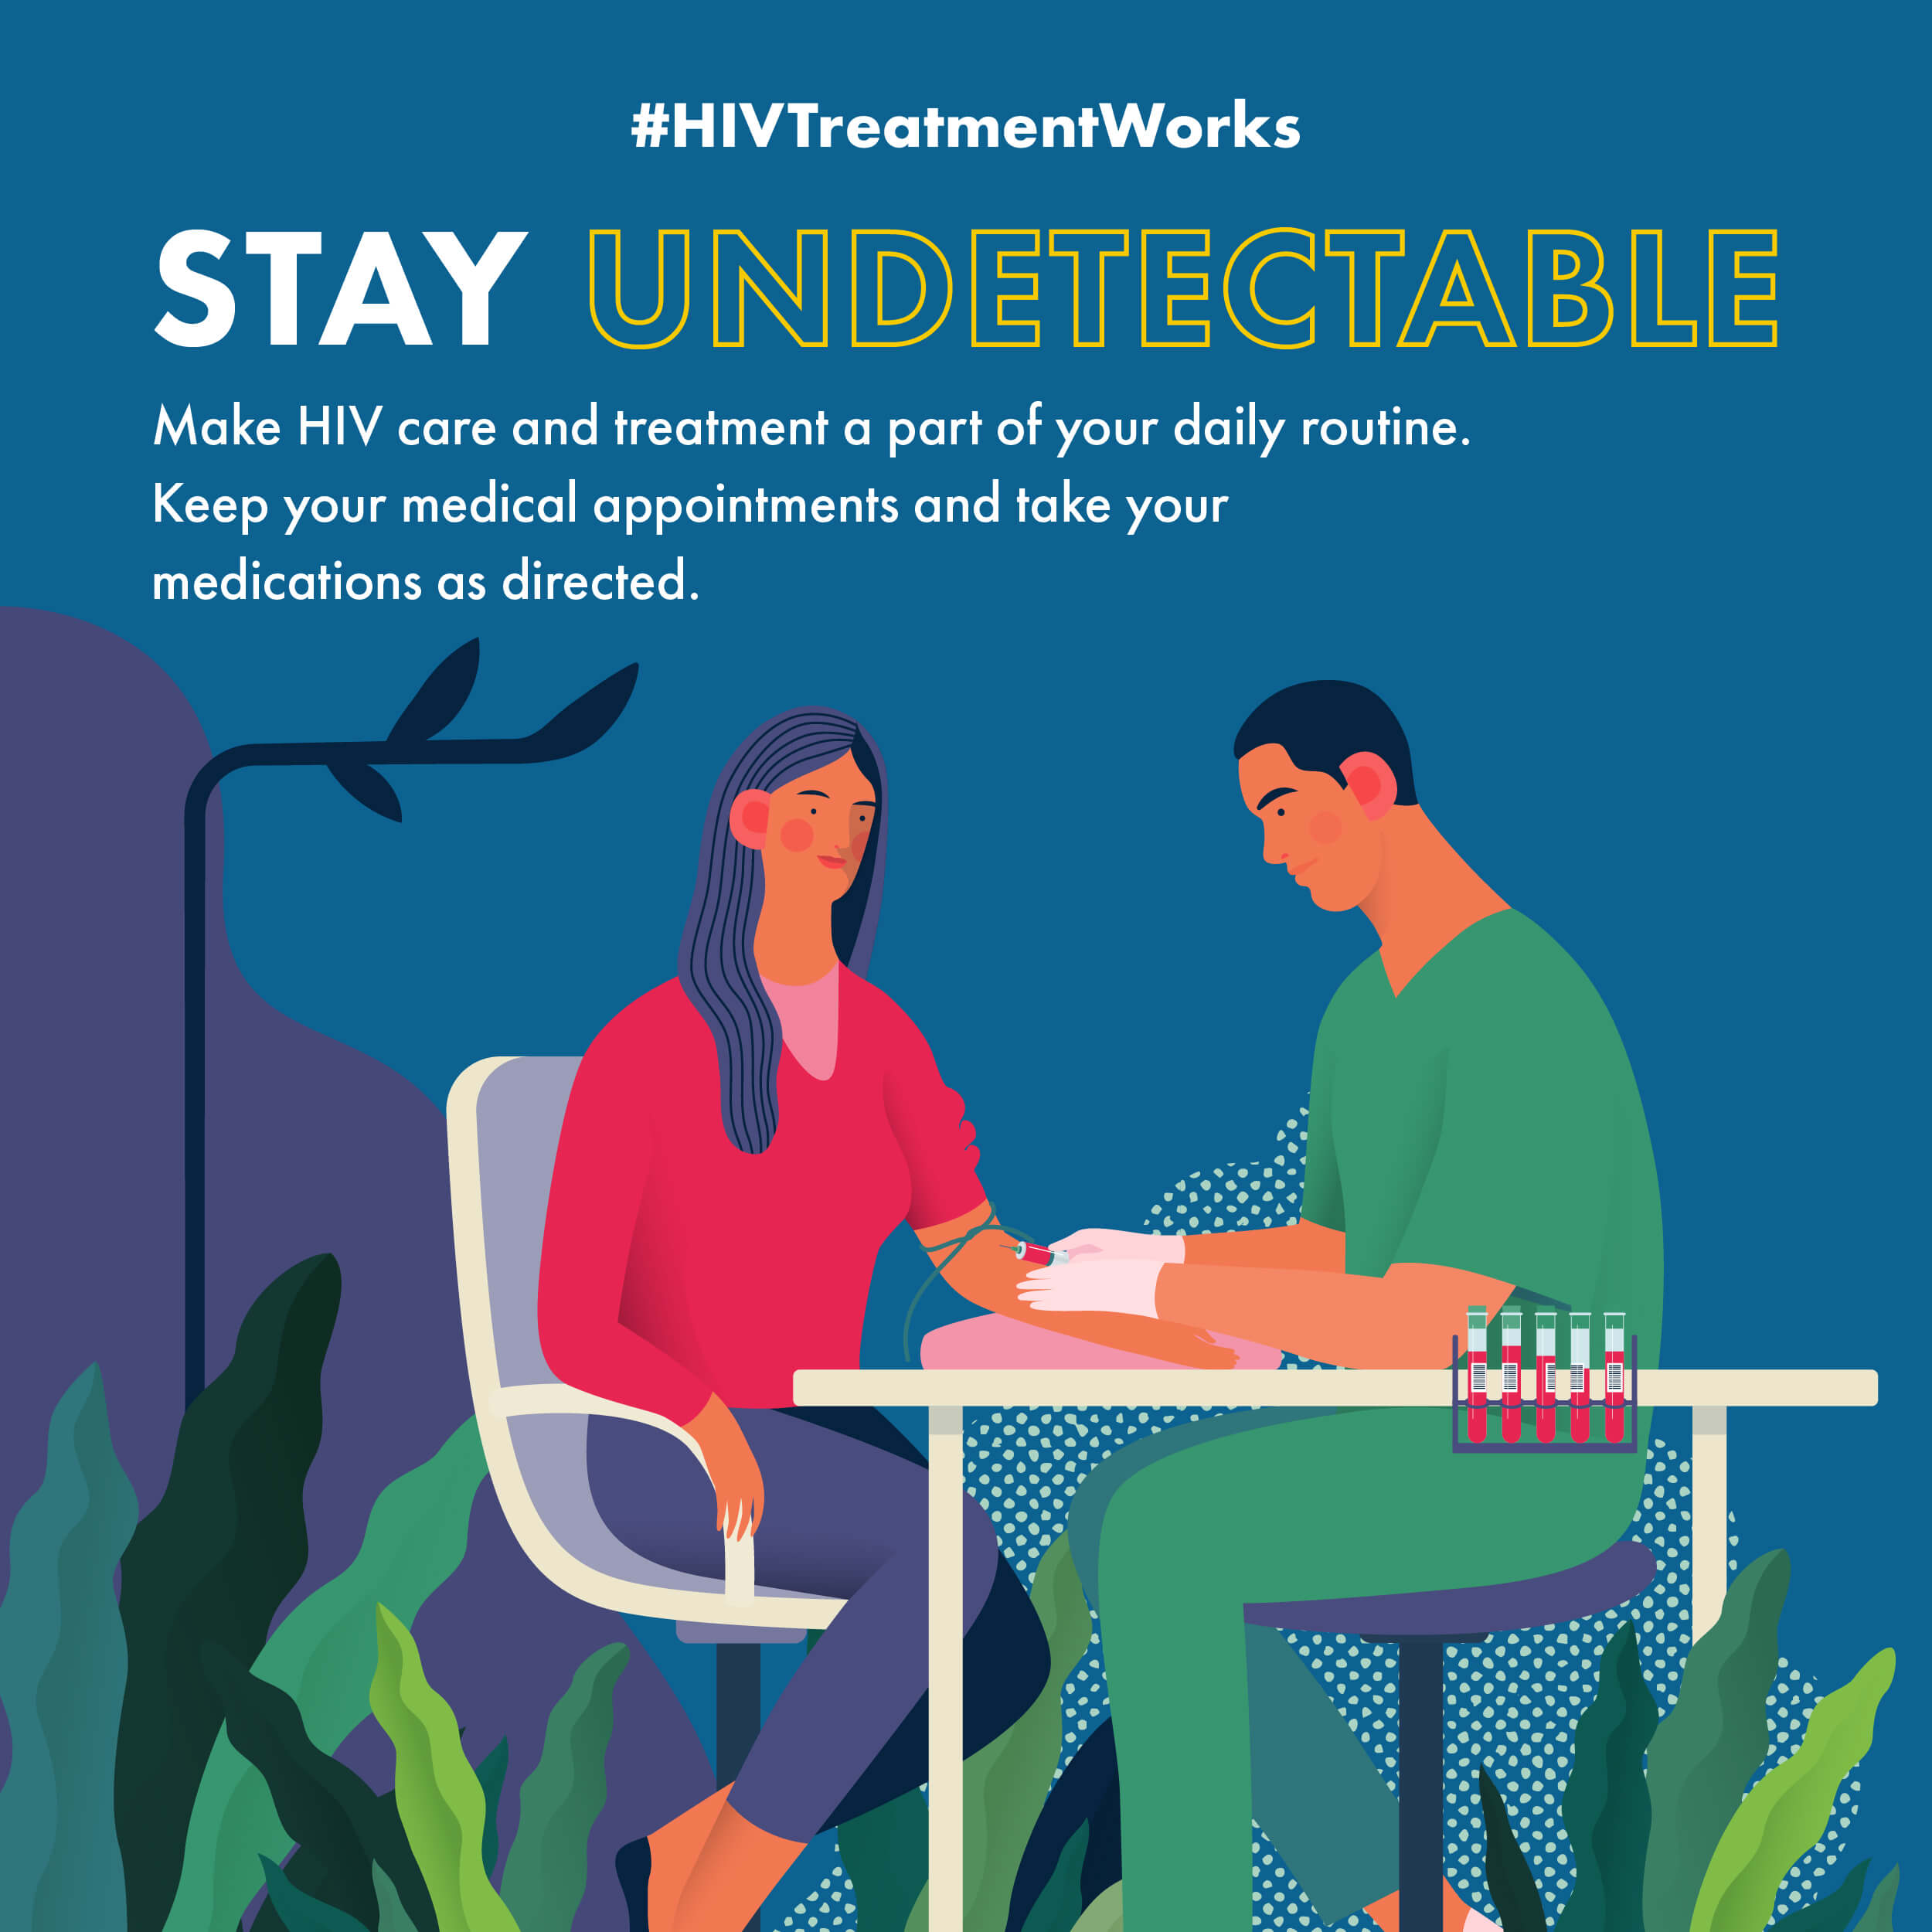 HIV Treatment as Prevention